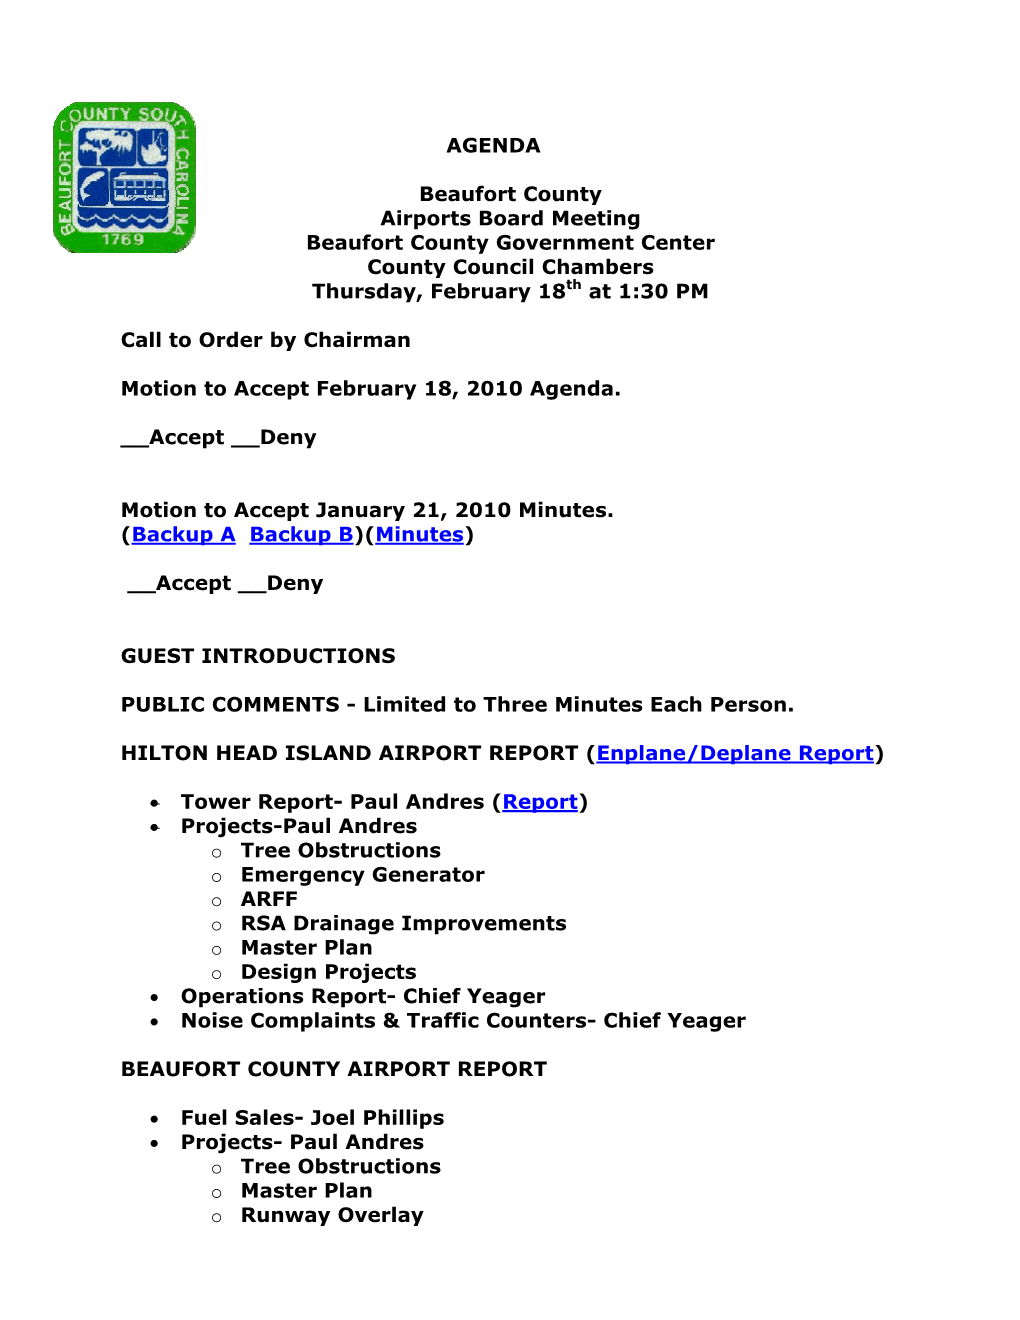 AGENDA Beaufort County Airports Board Meeting Beaufort County